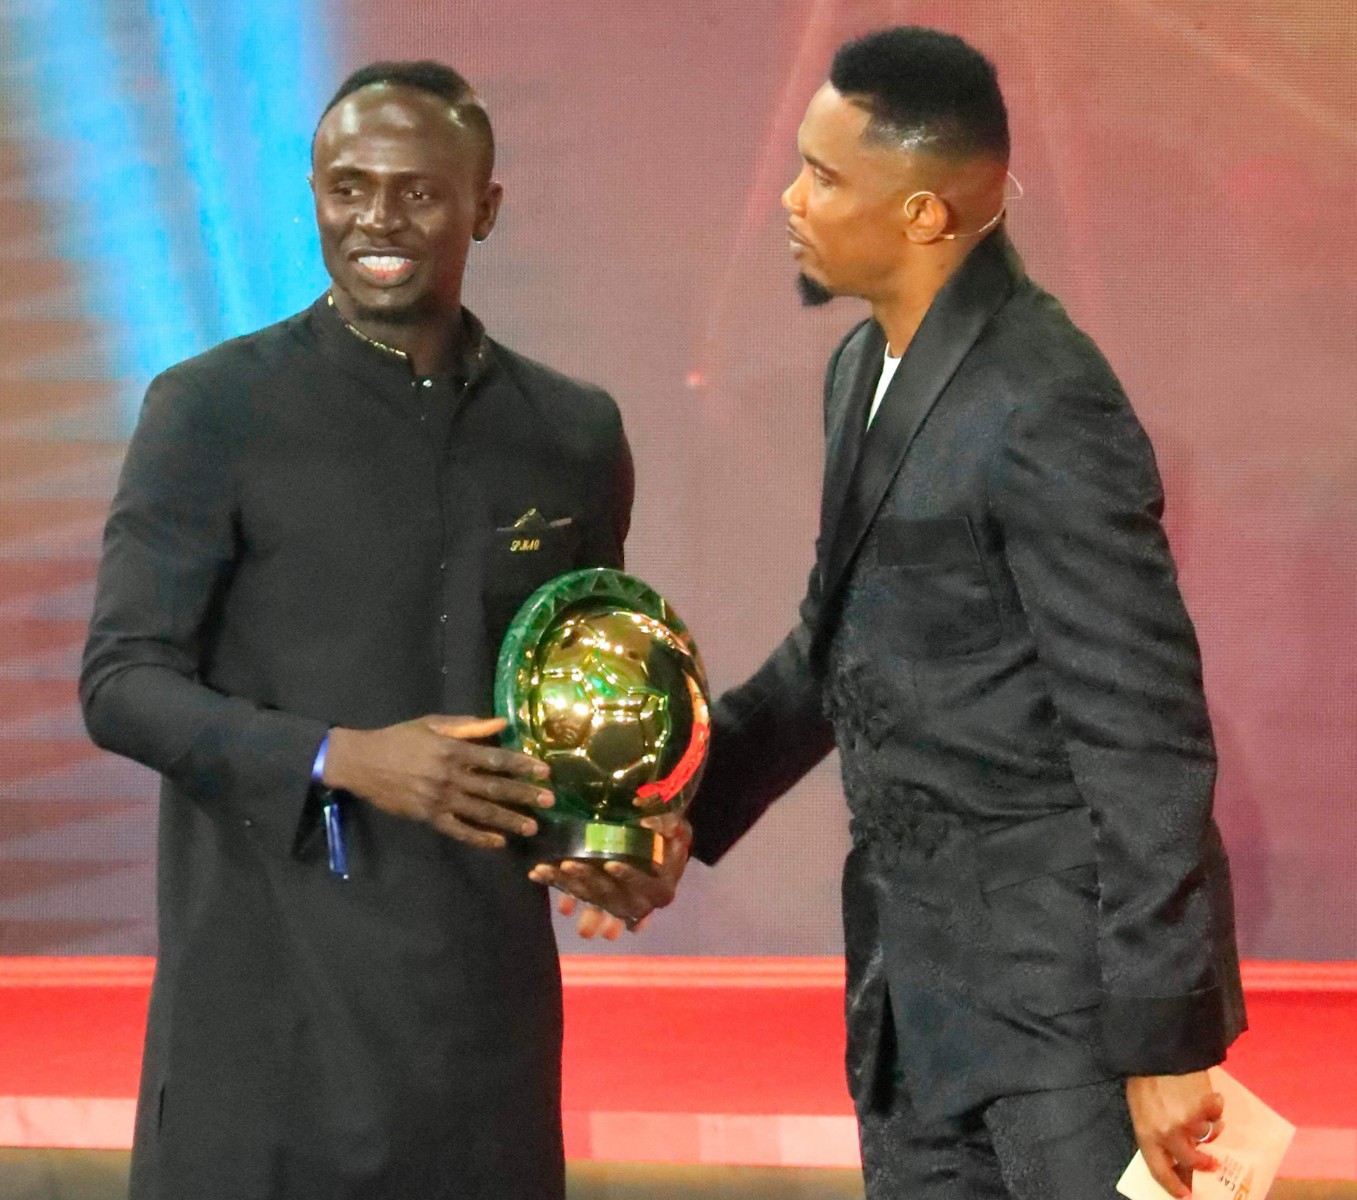 The Liverpool forward was handed the award by four-time winner Samuel Eto'o